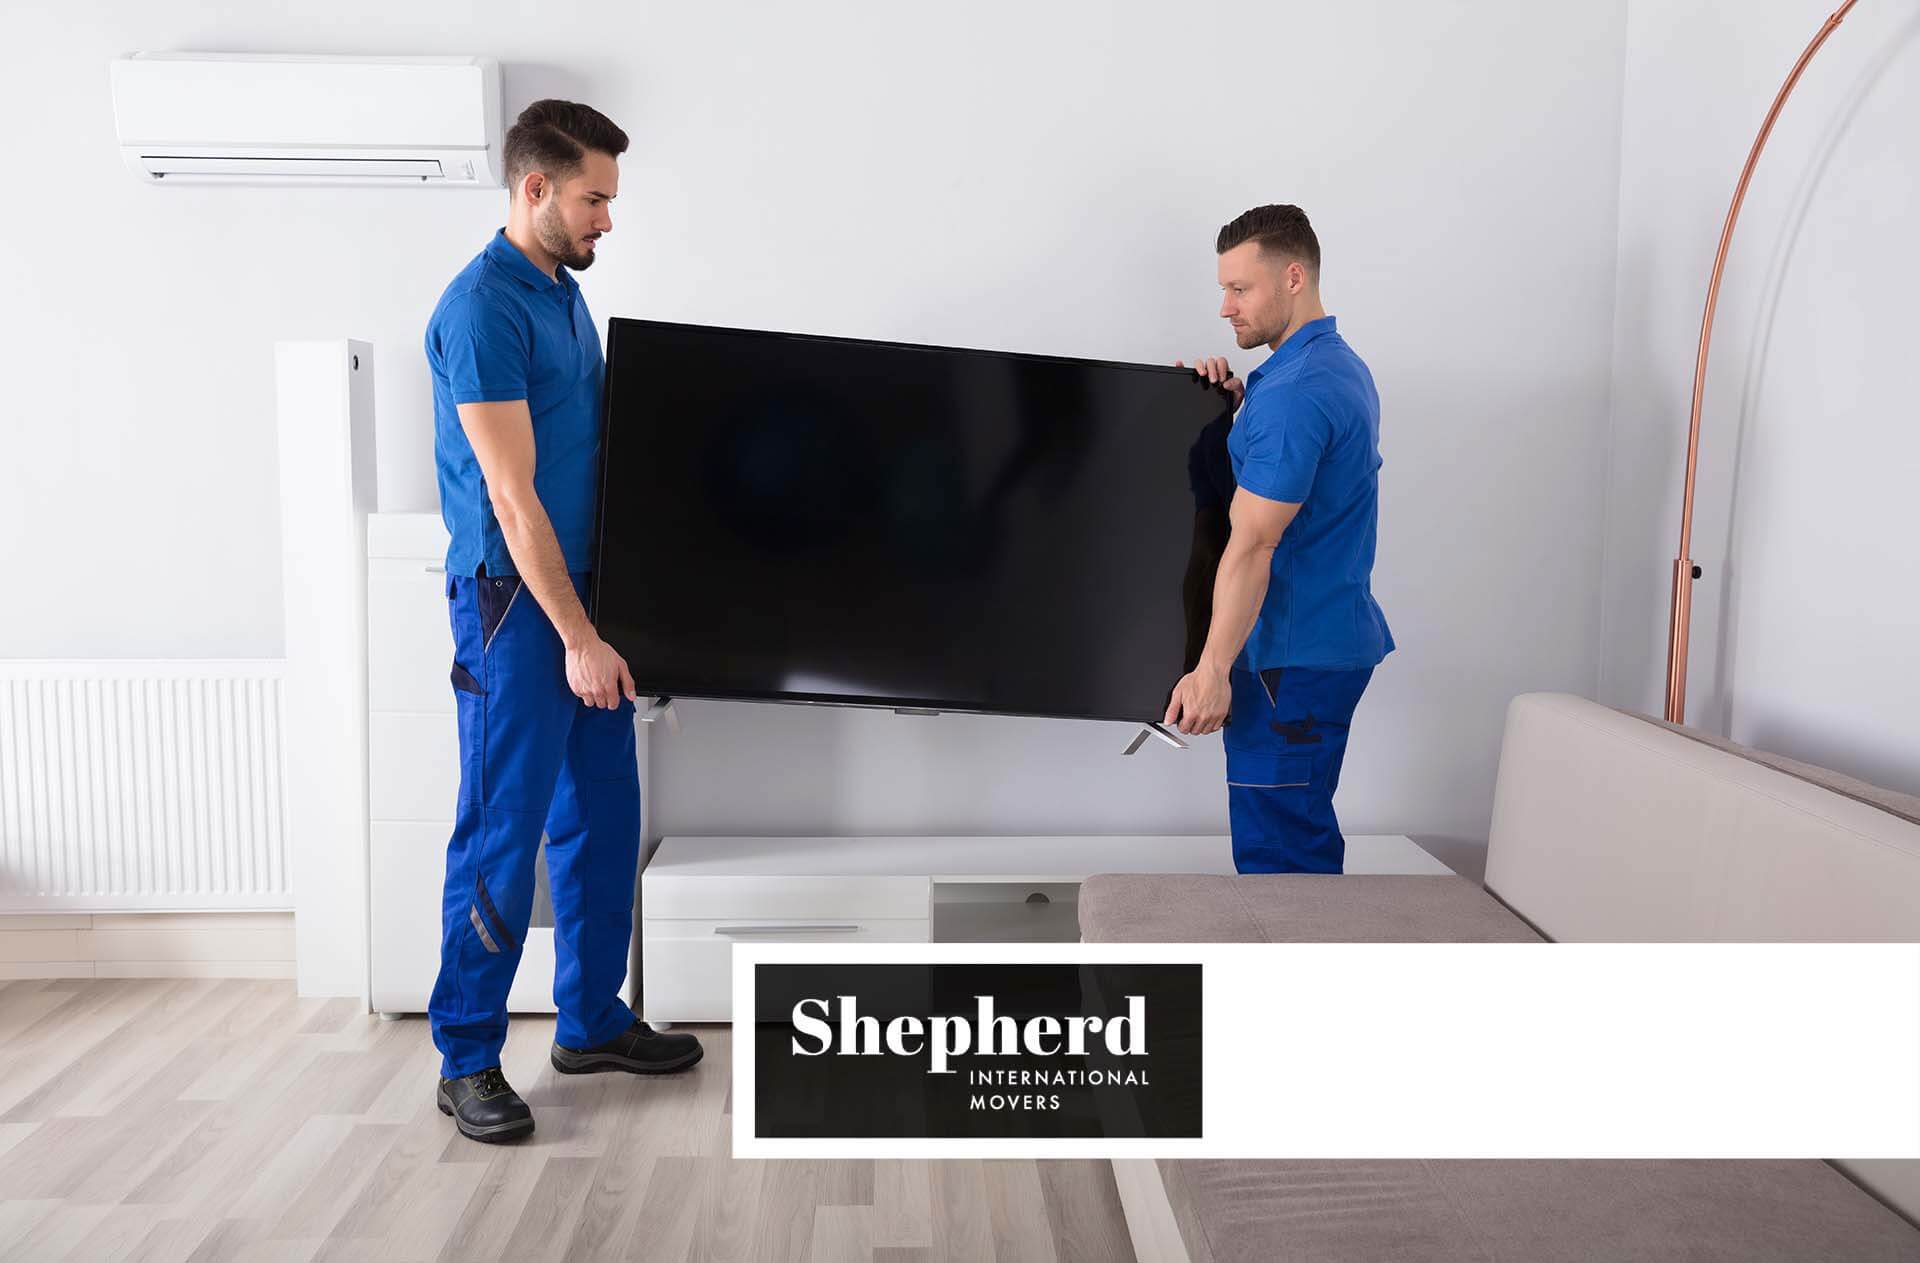 Professional movers with a TV Shepherd International Movers logo